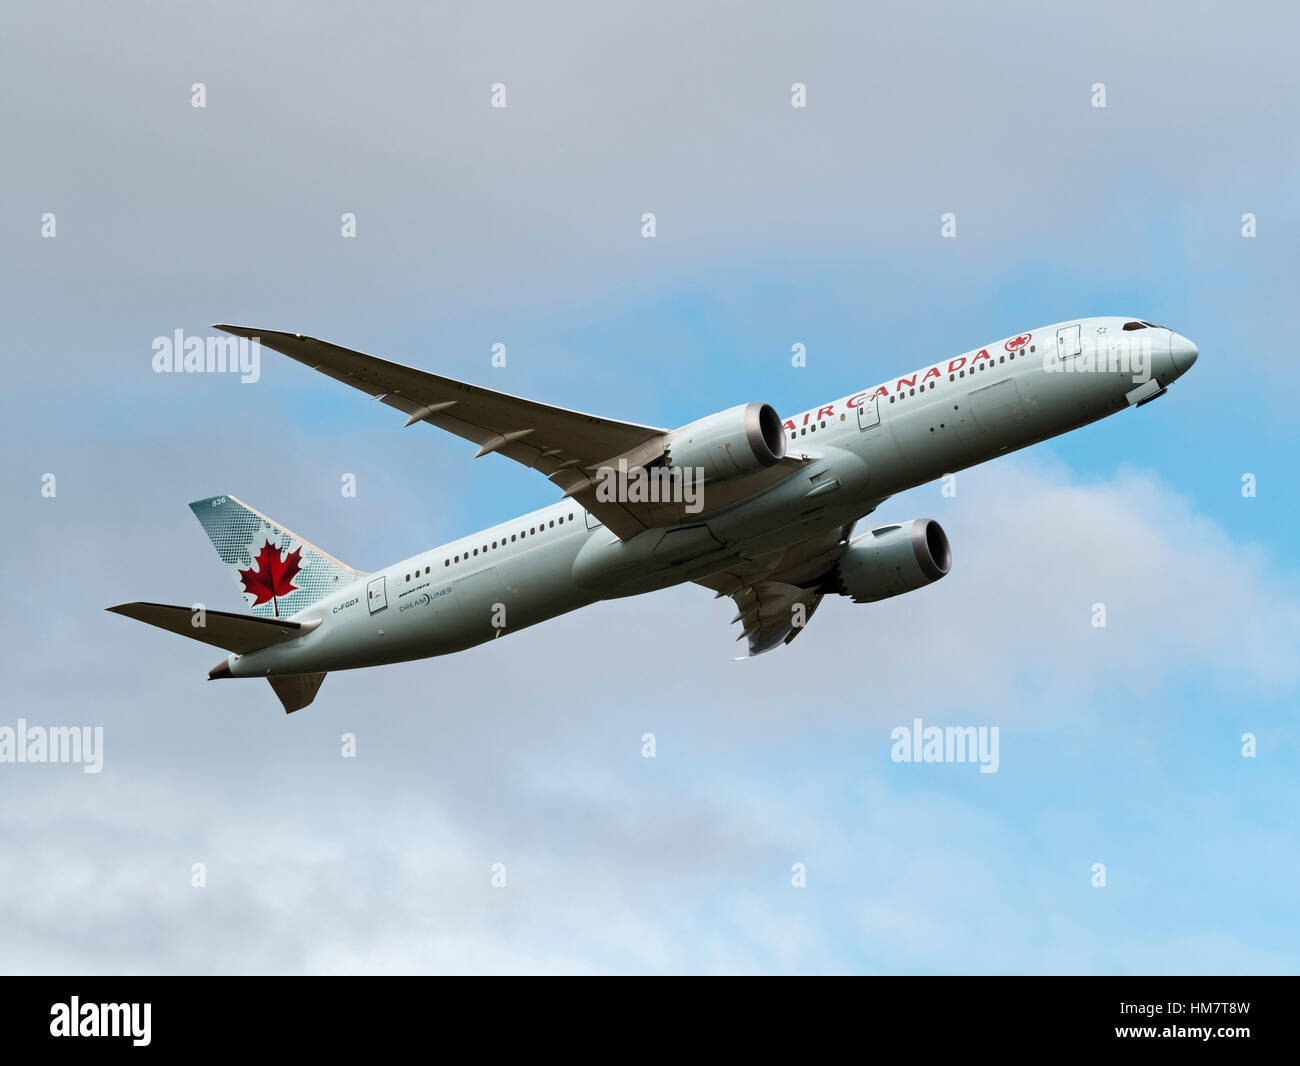 Air Canada plane airplane Boeing 787 (787-9) Dreamliner wide-body jet airliner airborne takes off from Vancouver International Airport Stock Photo